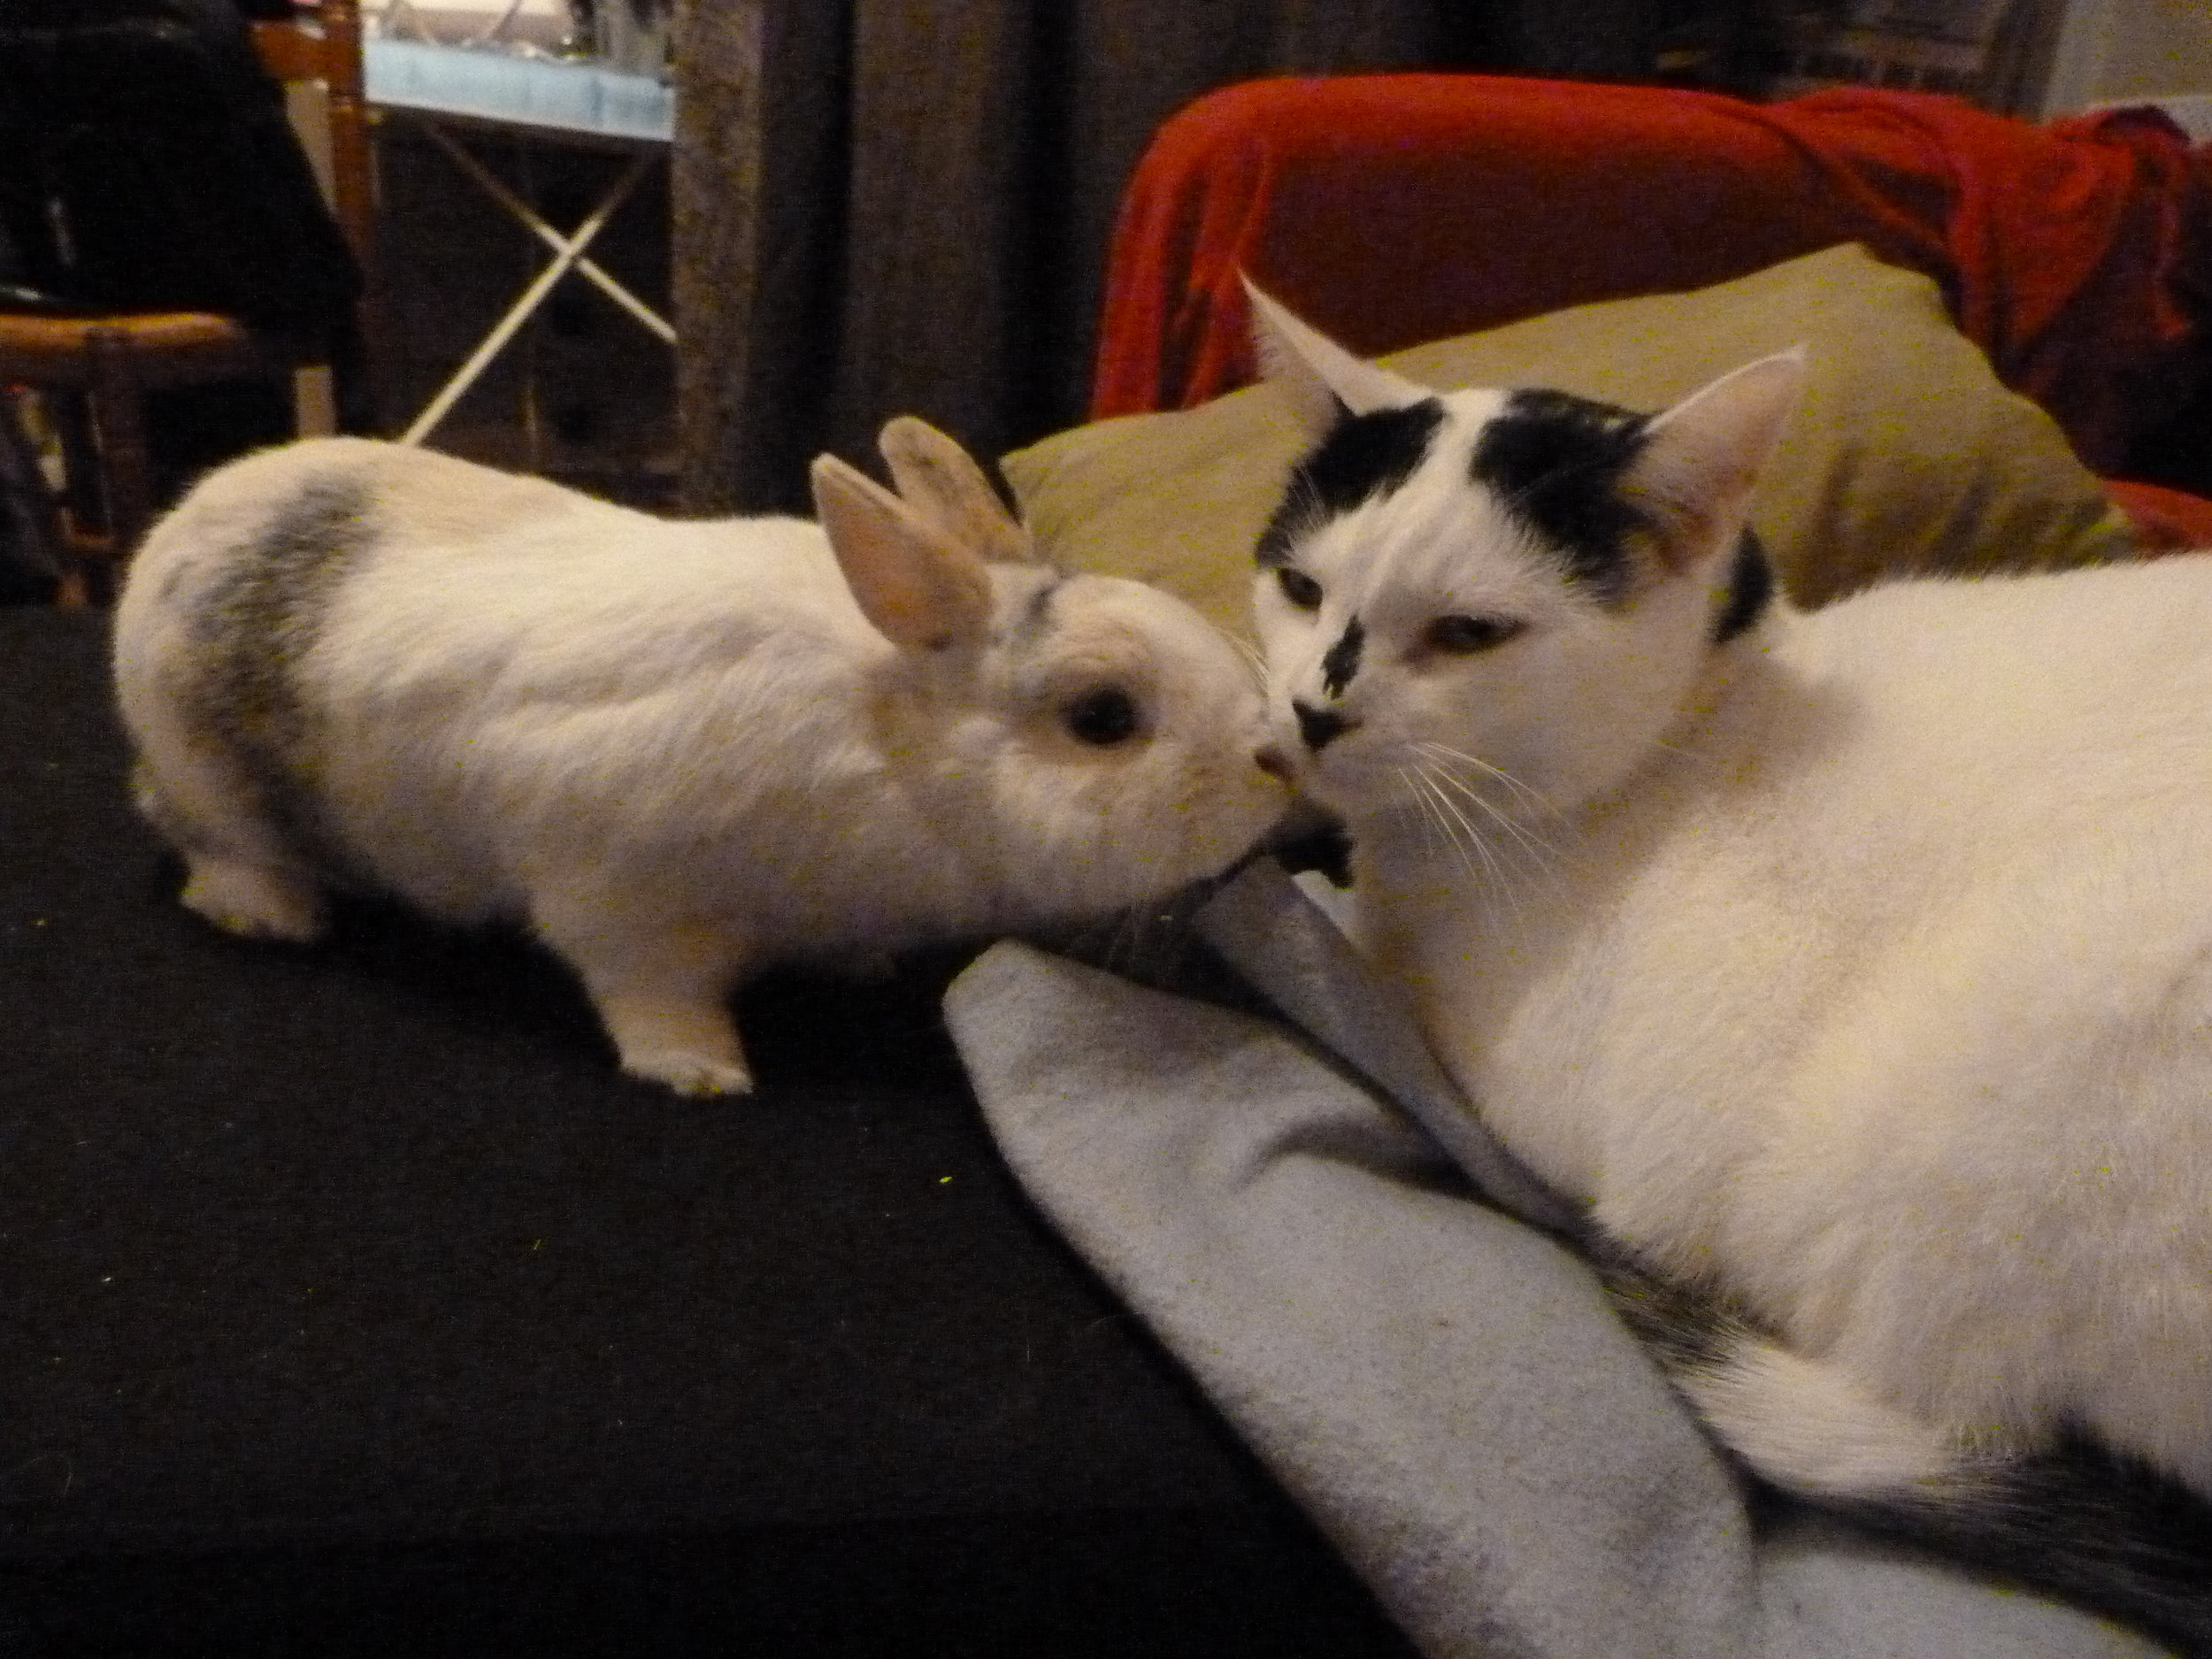 Bunny Tries to Cheer Up Kitty with Nose Kisses